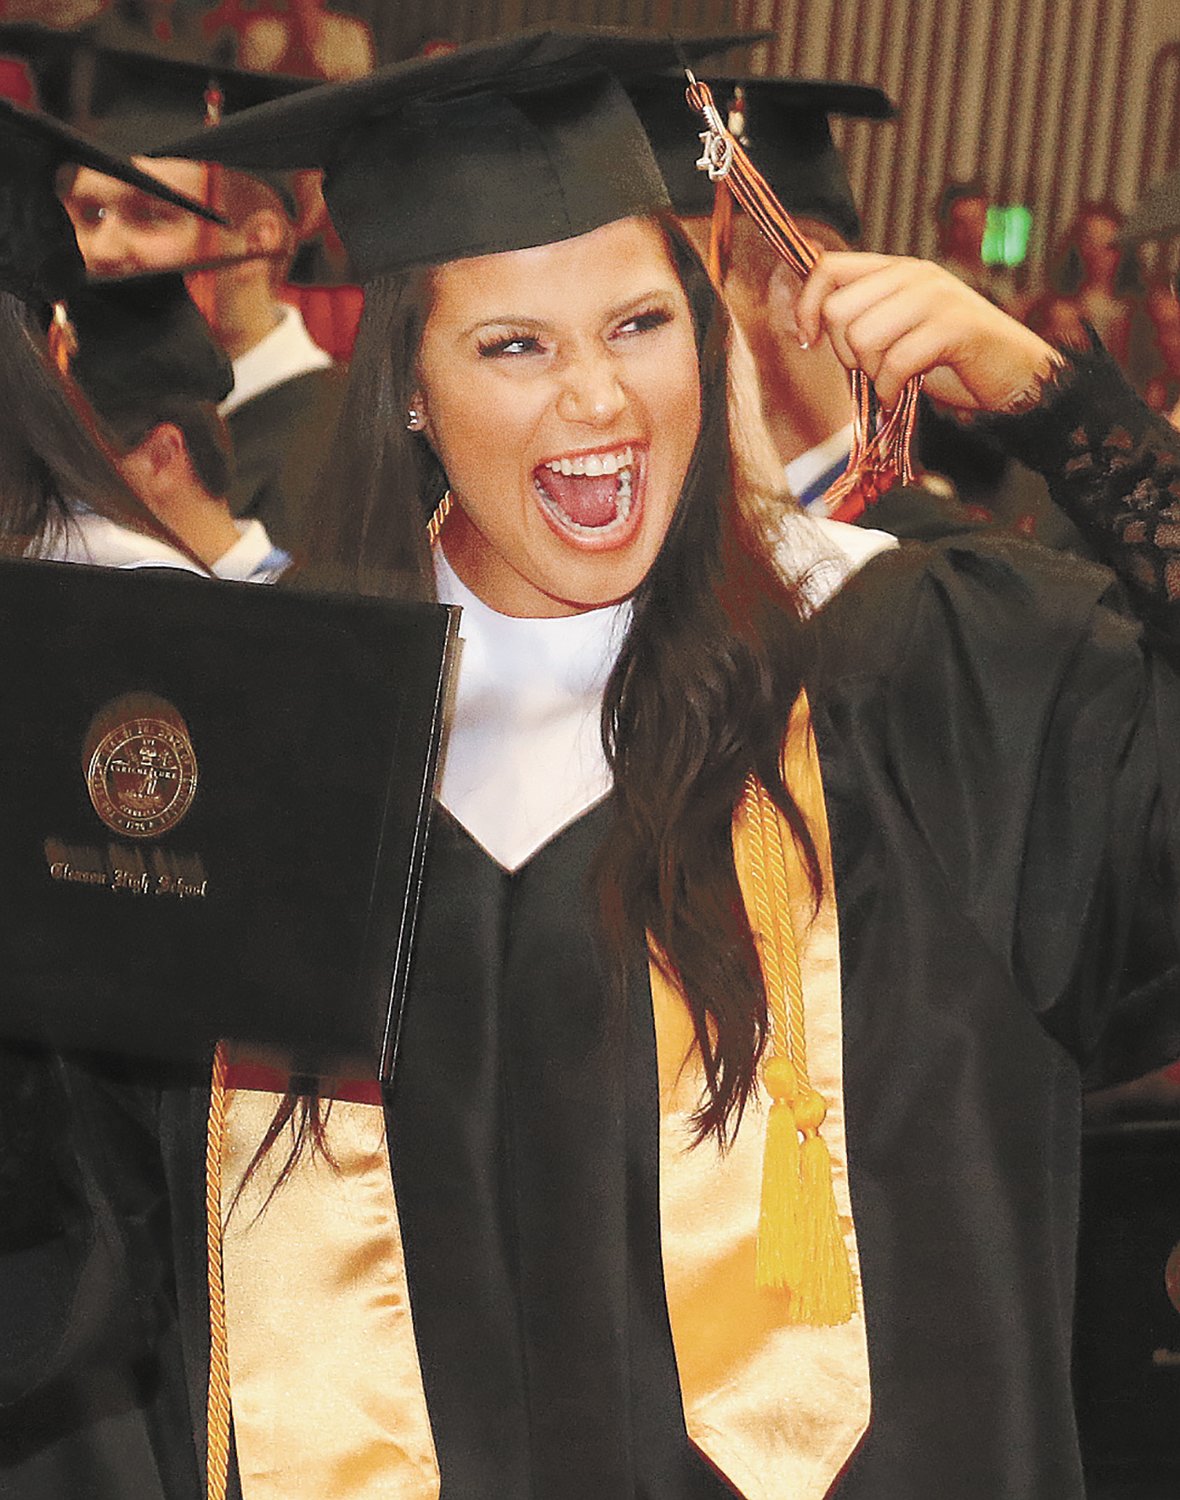 Whitney Clark is all smiles as she changes her tassel from right to left at the Gleason Commencement.